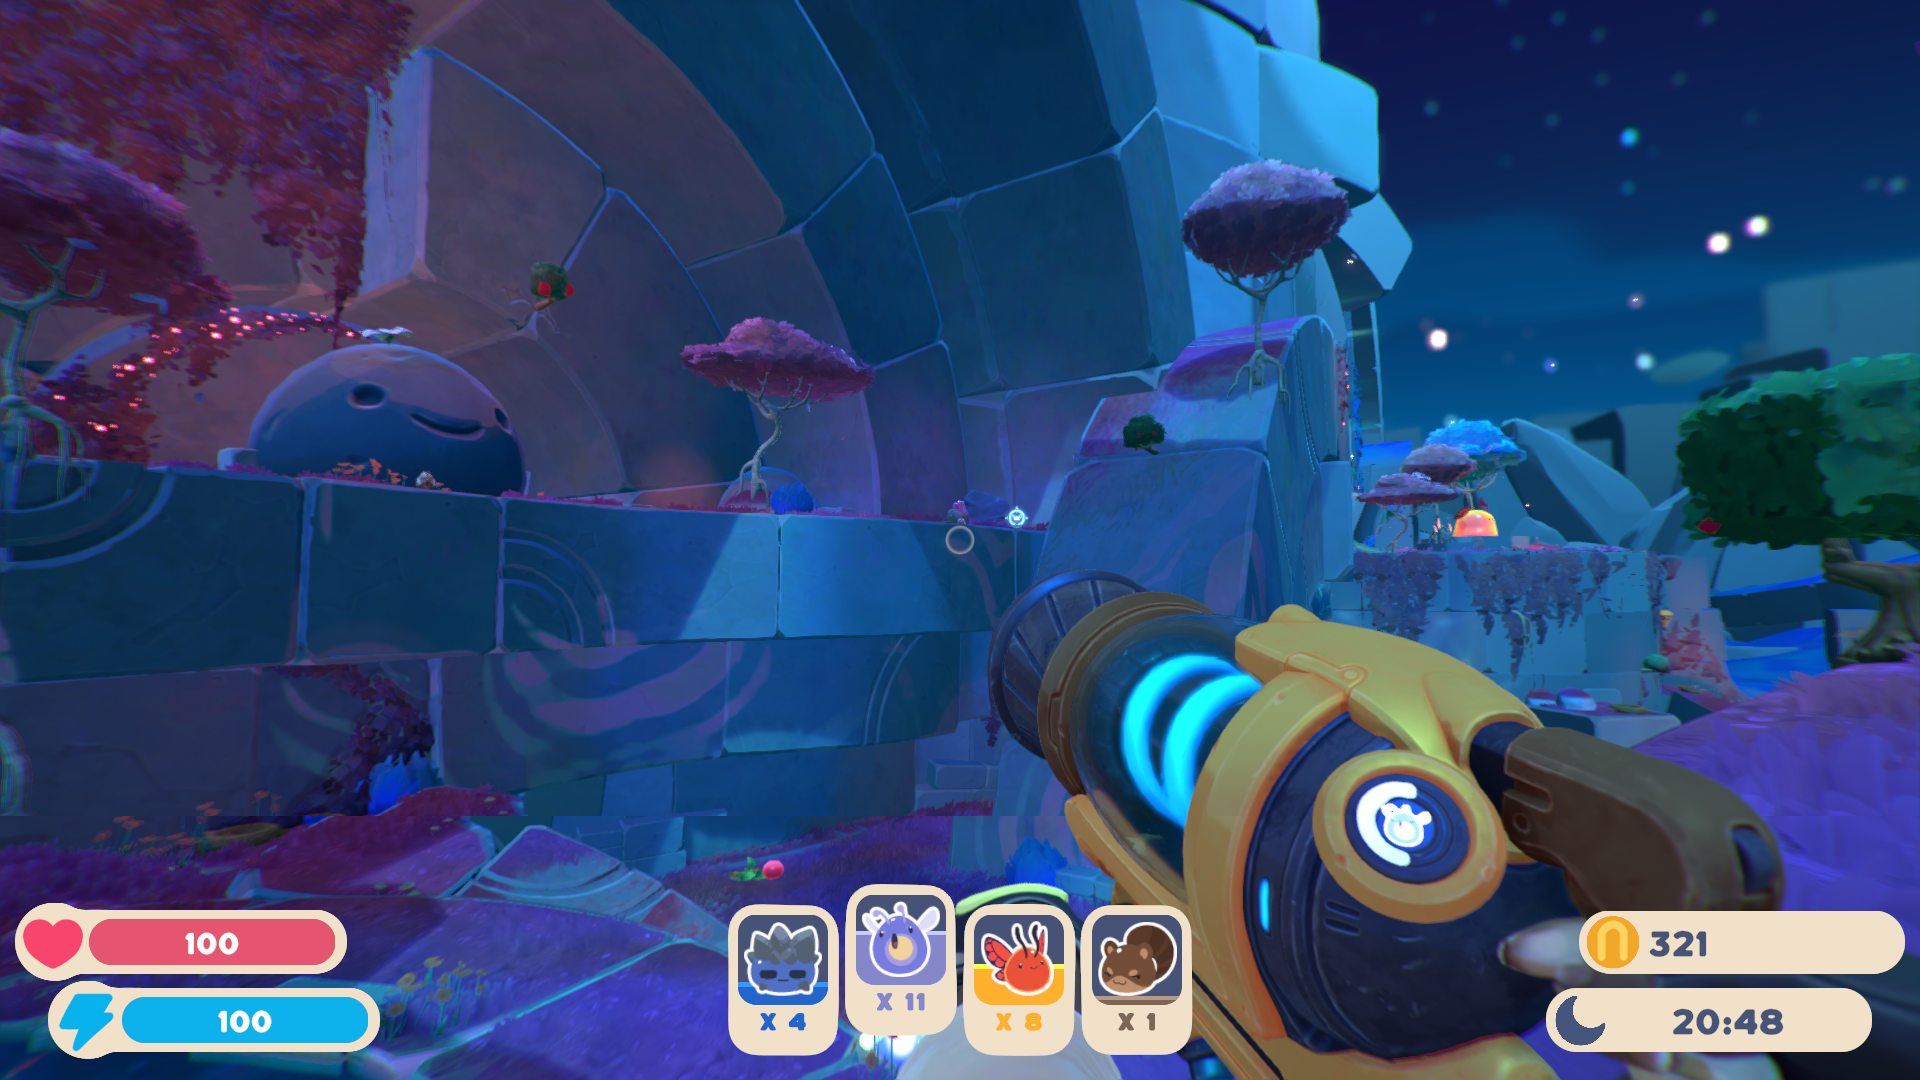 Slime Rancher 2: How To Find All Map Data Locations